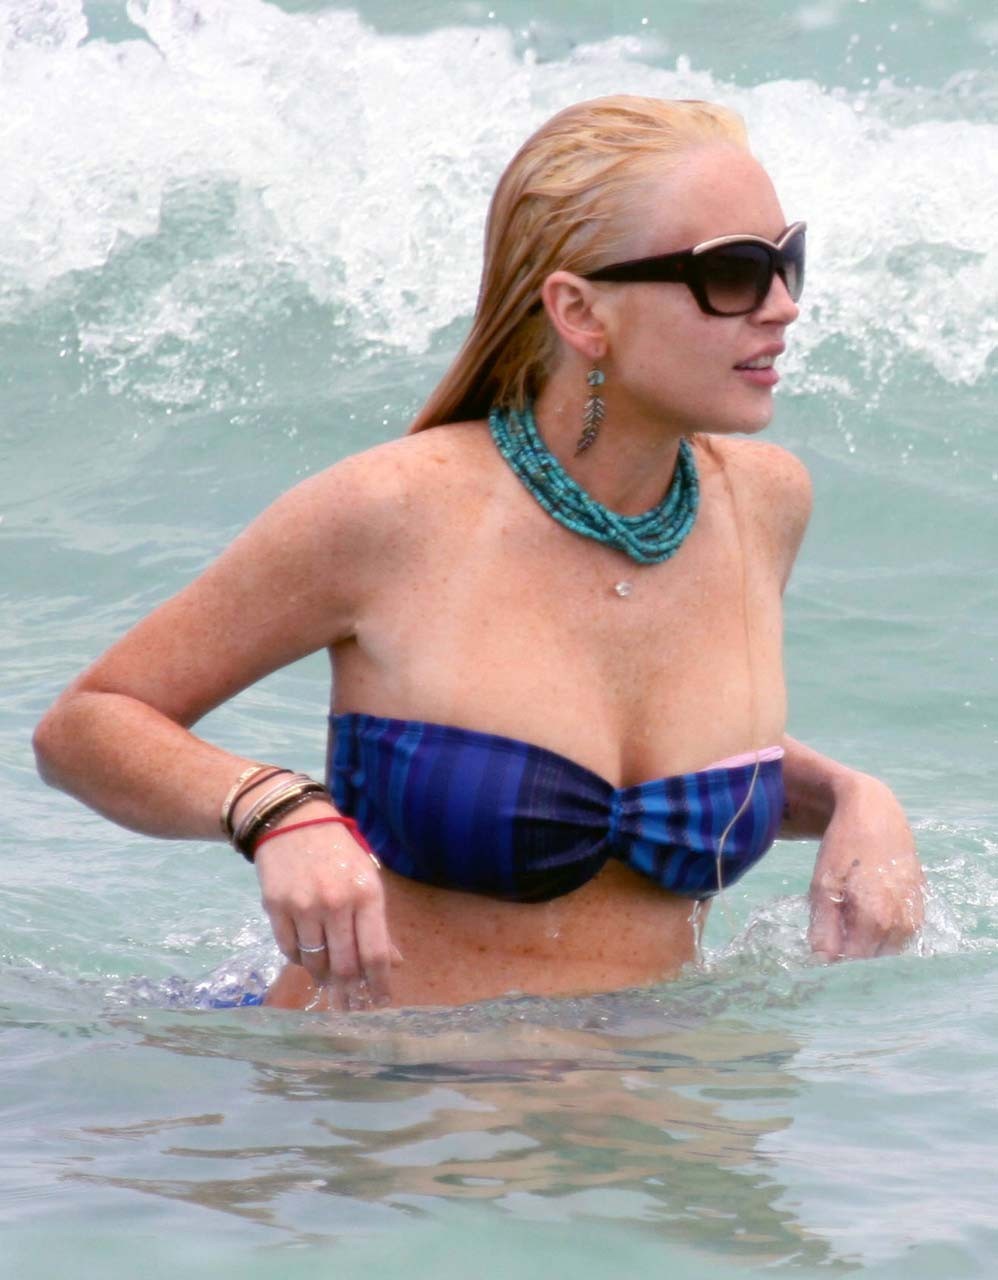 Lindsay Lohan tits slip from bikini on beach oops paparazzi pictures #75303541